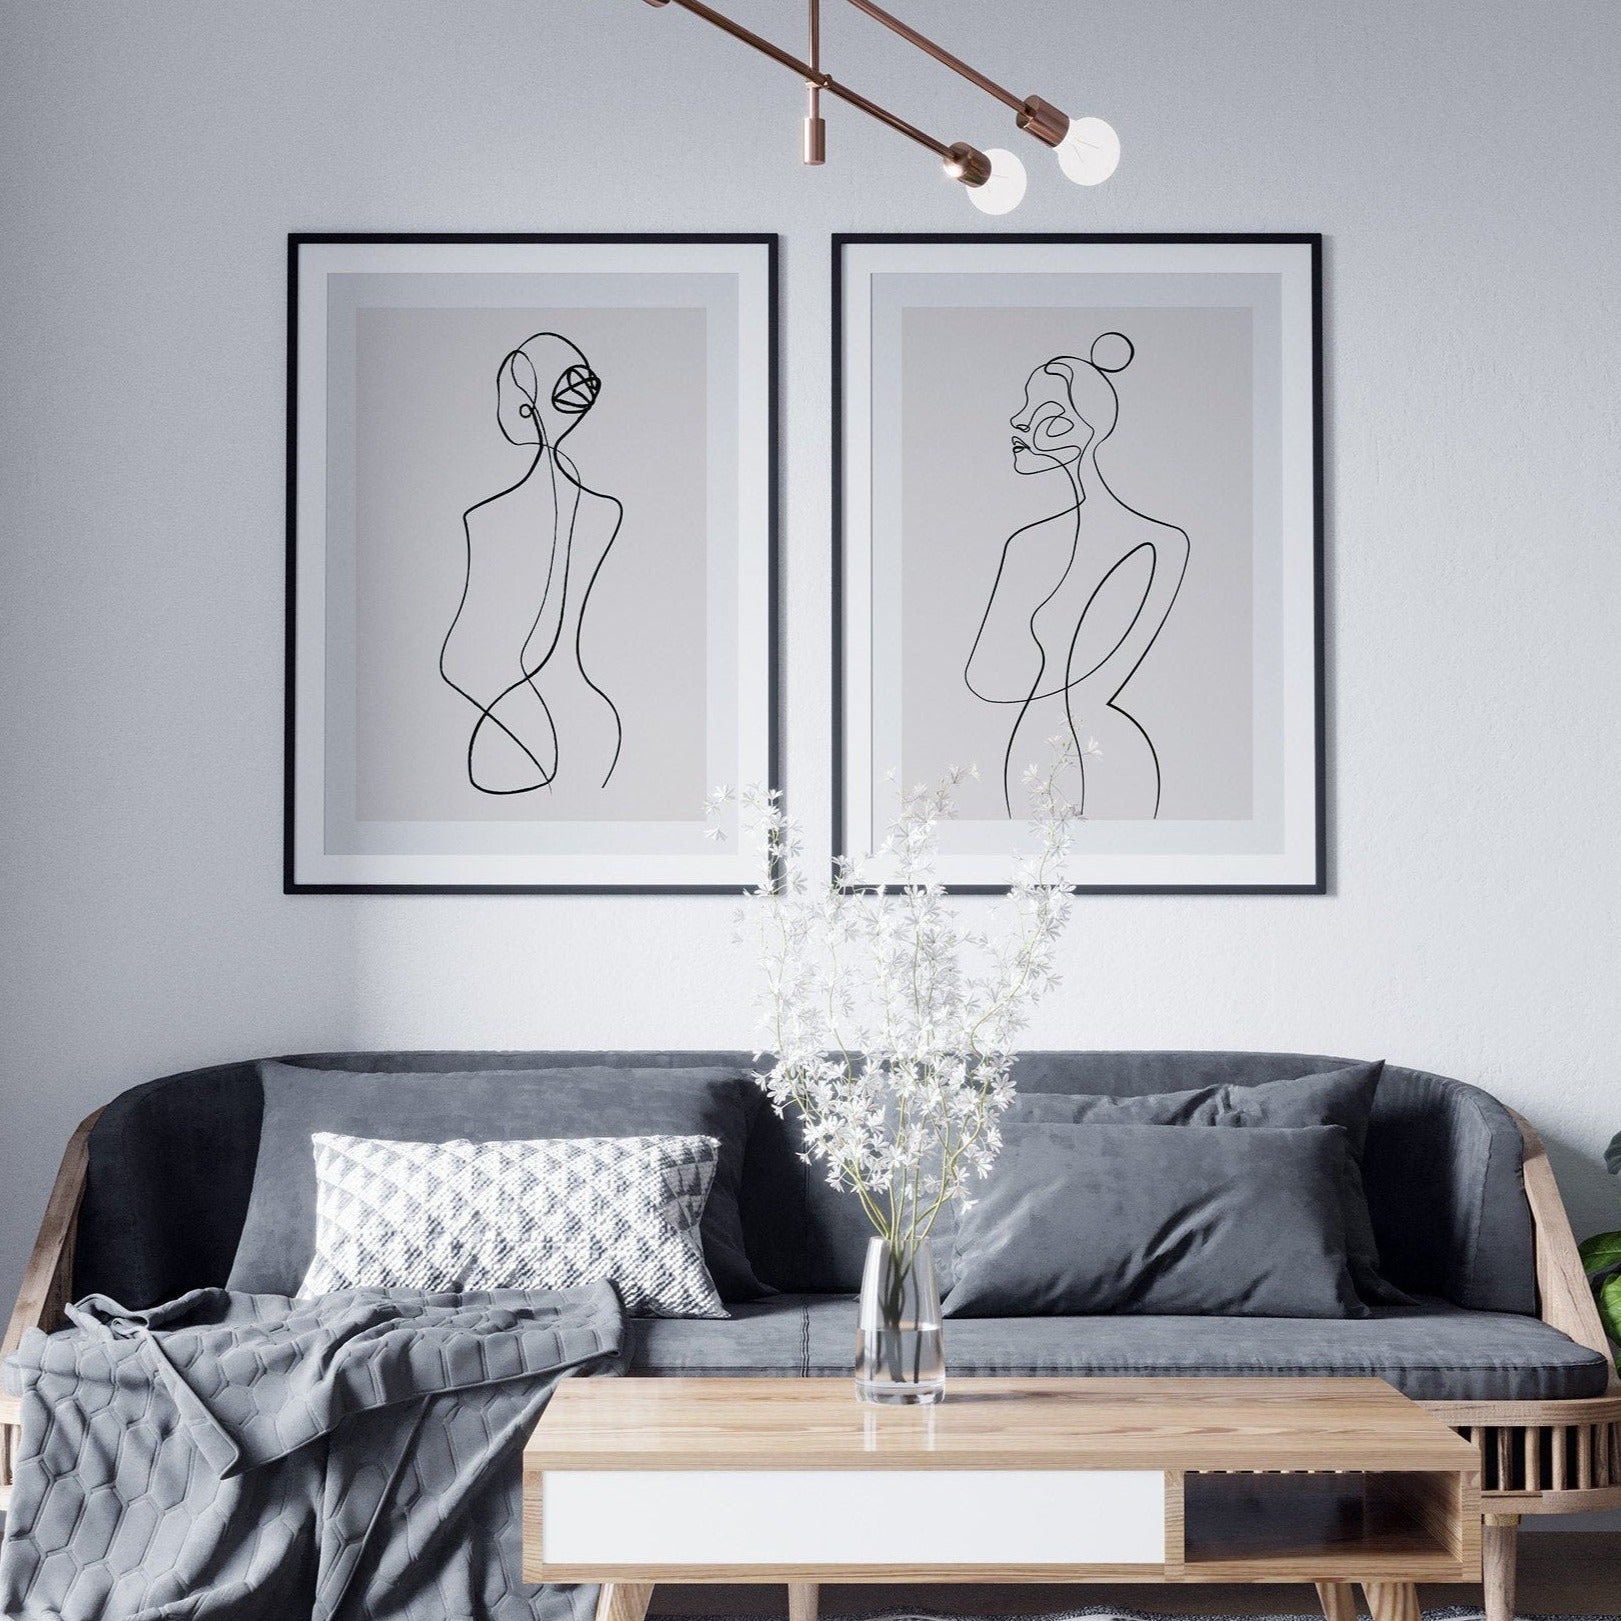 Minimalist line art prints in the form of abstract women